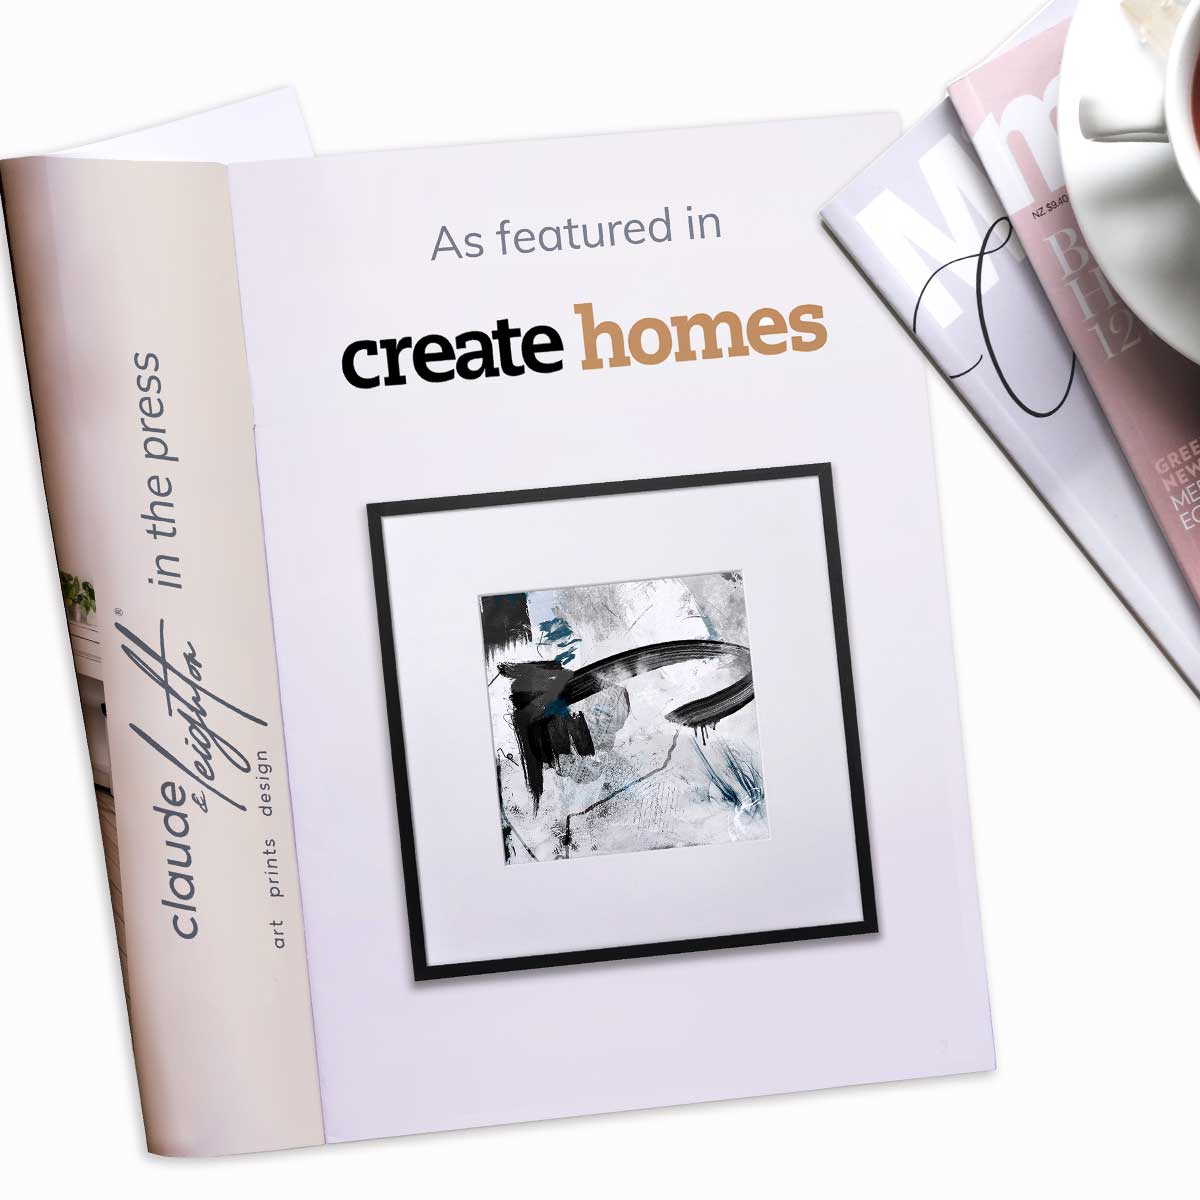 Memories of a Song monochrome art print as seen in Create Homes magazine